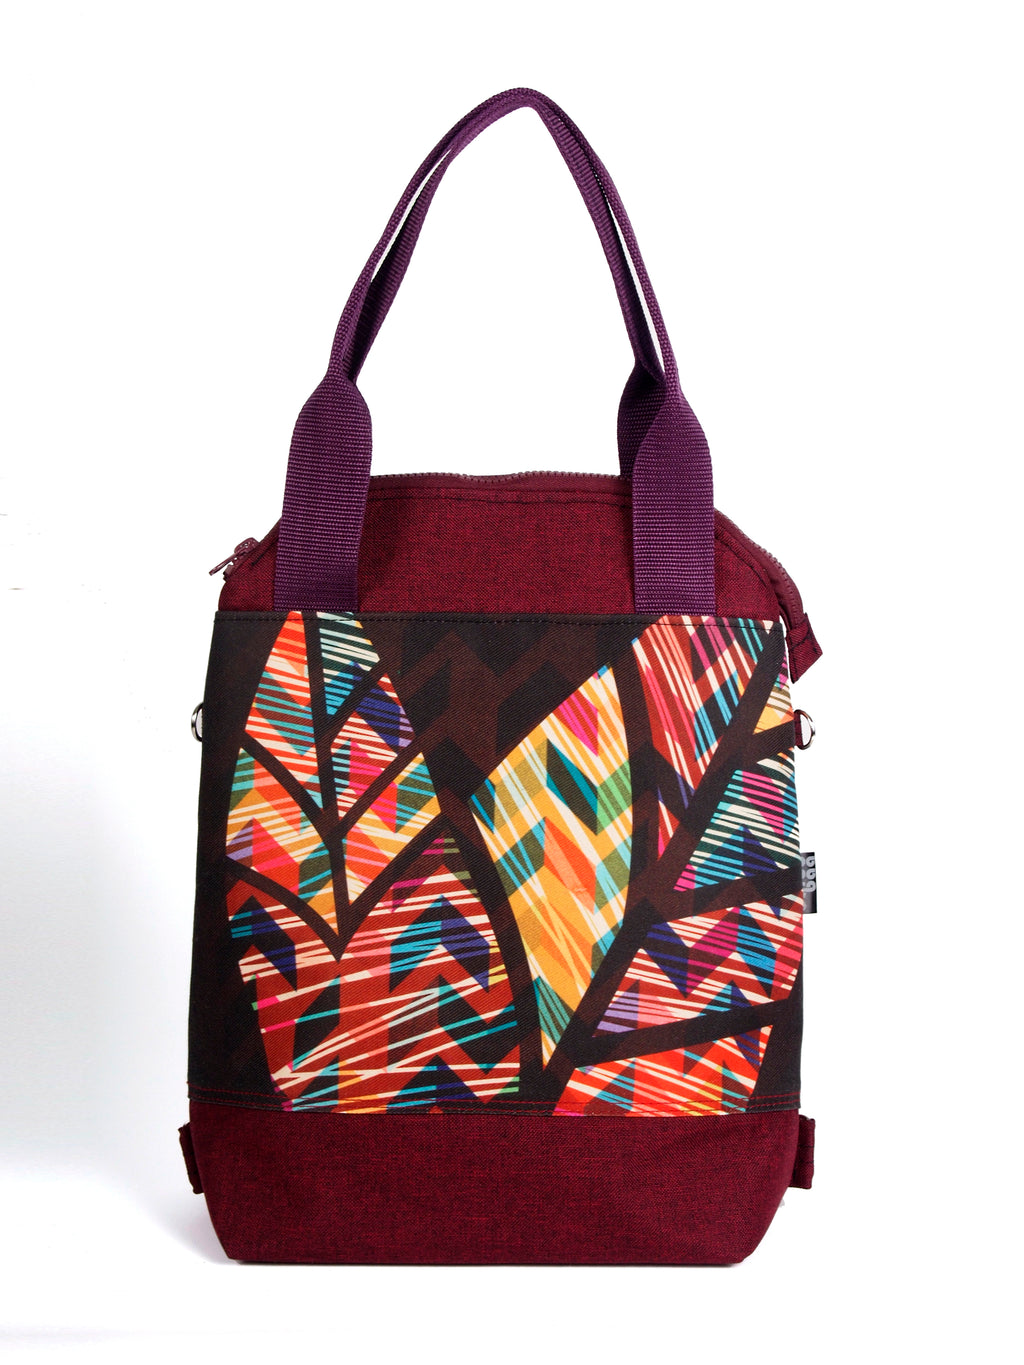 Bardo classic backpack textiles - One whole - Premium Textiles from BARDO ART WORKS - Just lvabstract, black, floral, handemade, leaves, tablet, urban style, woman, work bag89.00! Shop now at BARDO ART WORKS